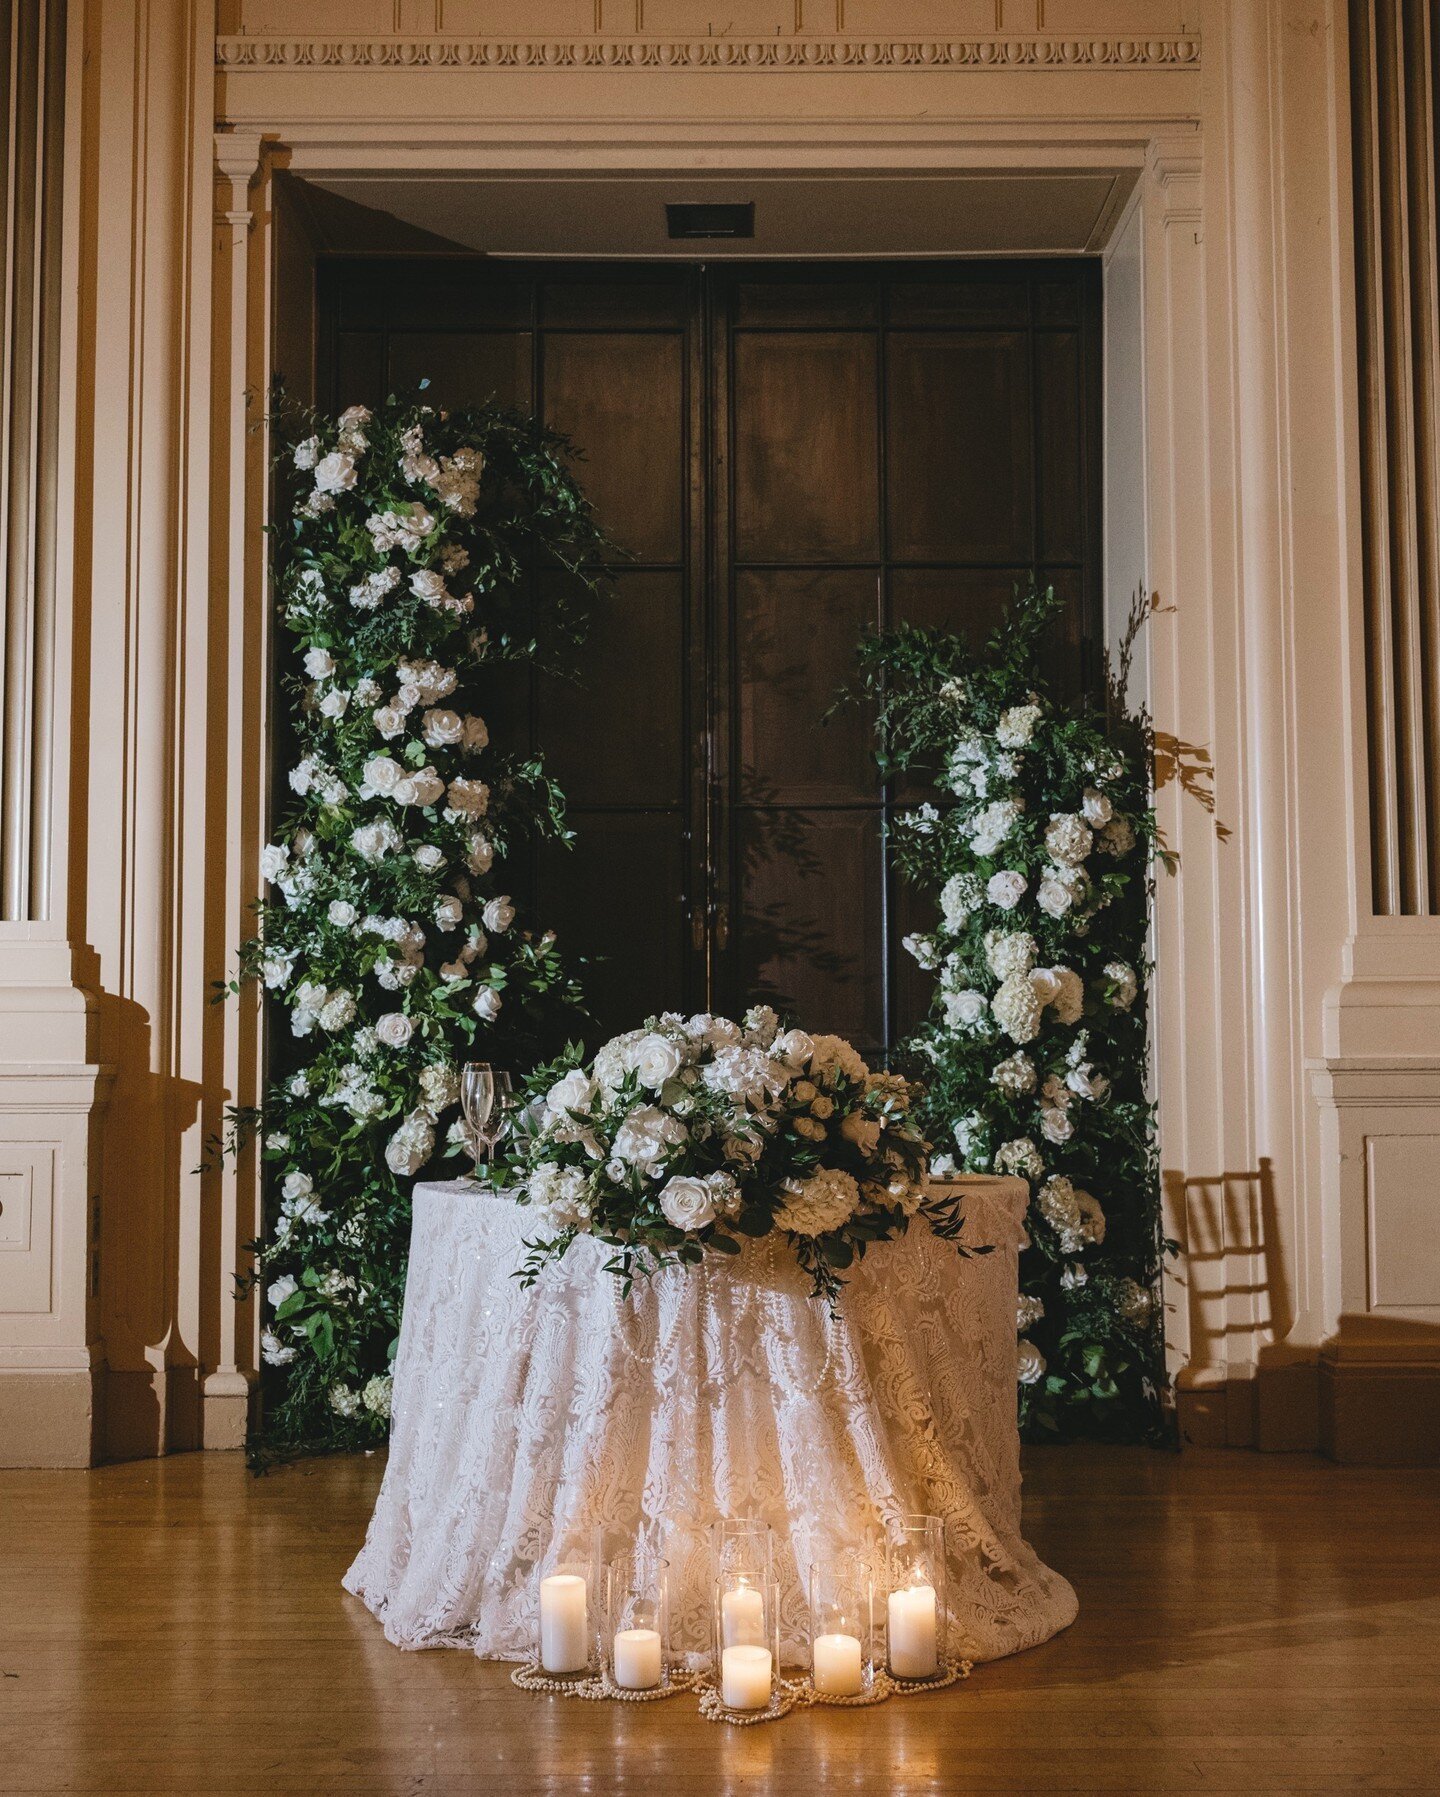 Save for regal wedding inspo! This sweetheart table was fit for a King &amp; Queen 👑✨🤍

📷 @tylerboye